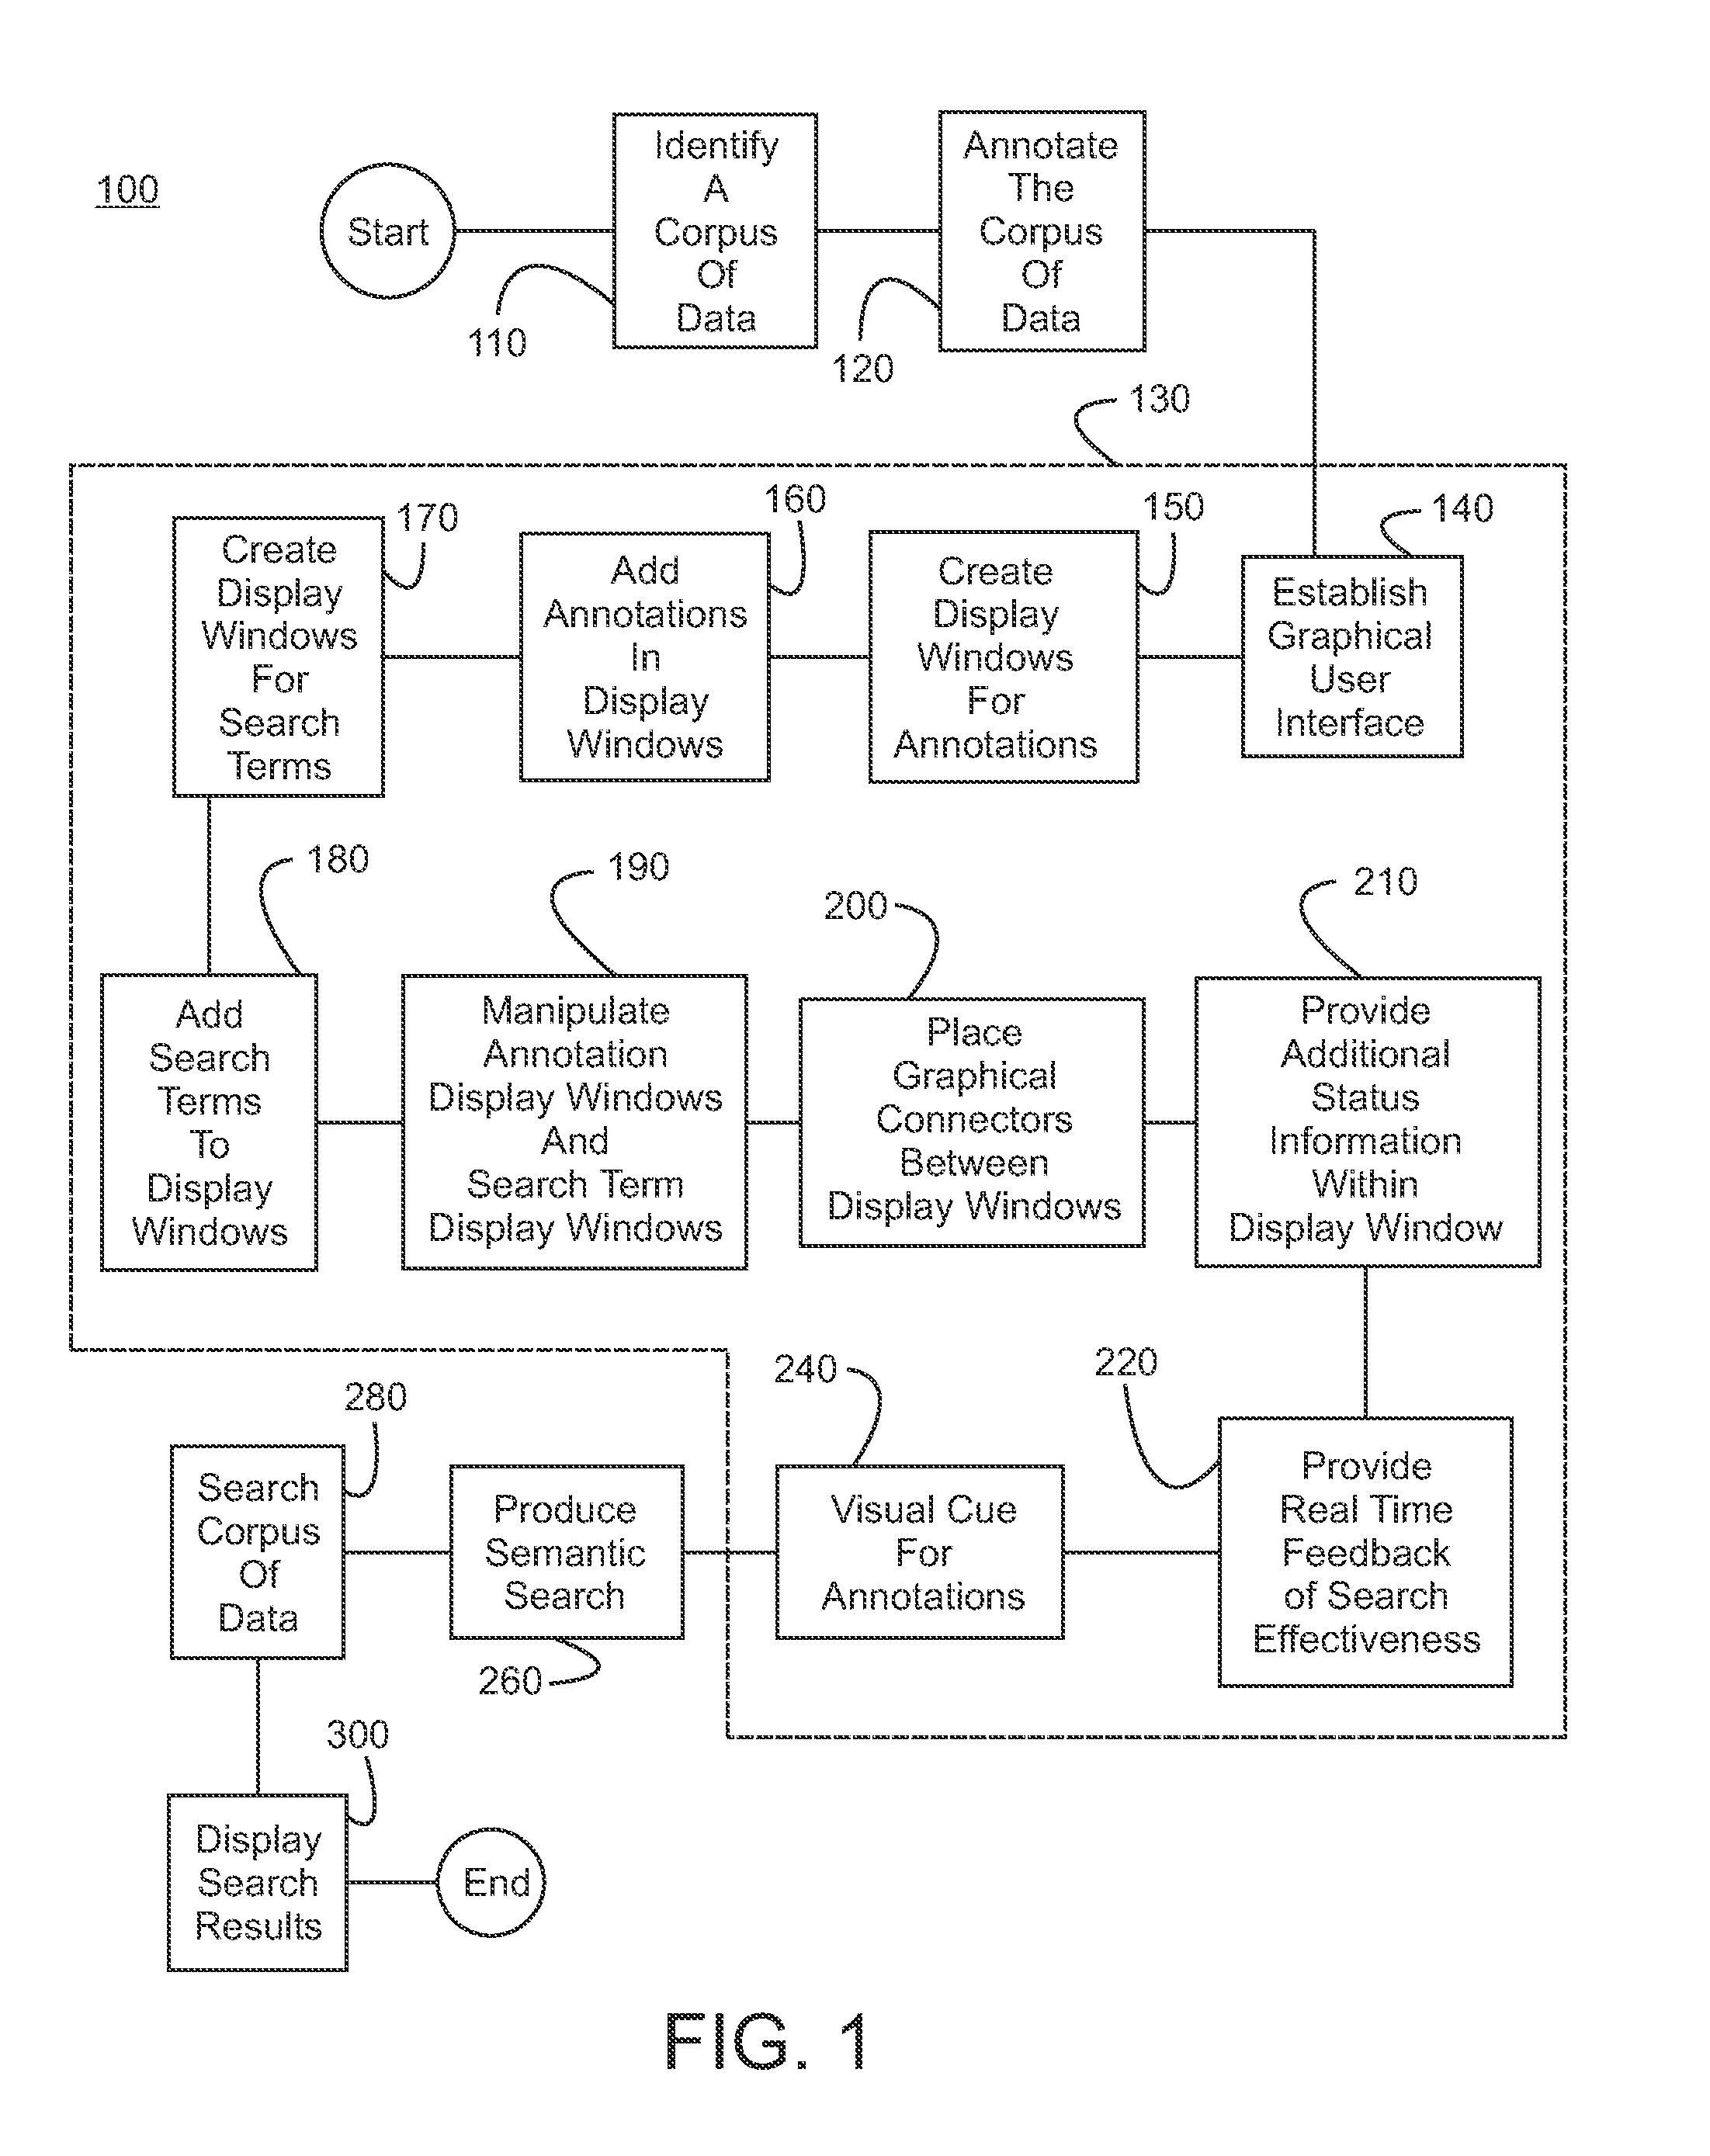 Method and process for semantic or faceted search over unstructured and annotated data